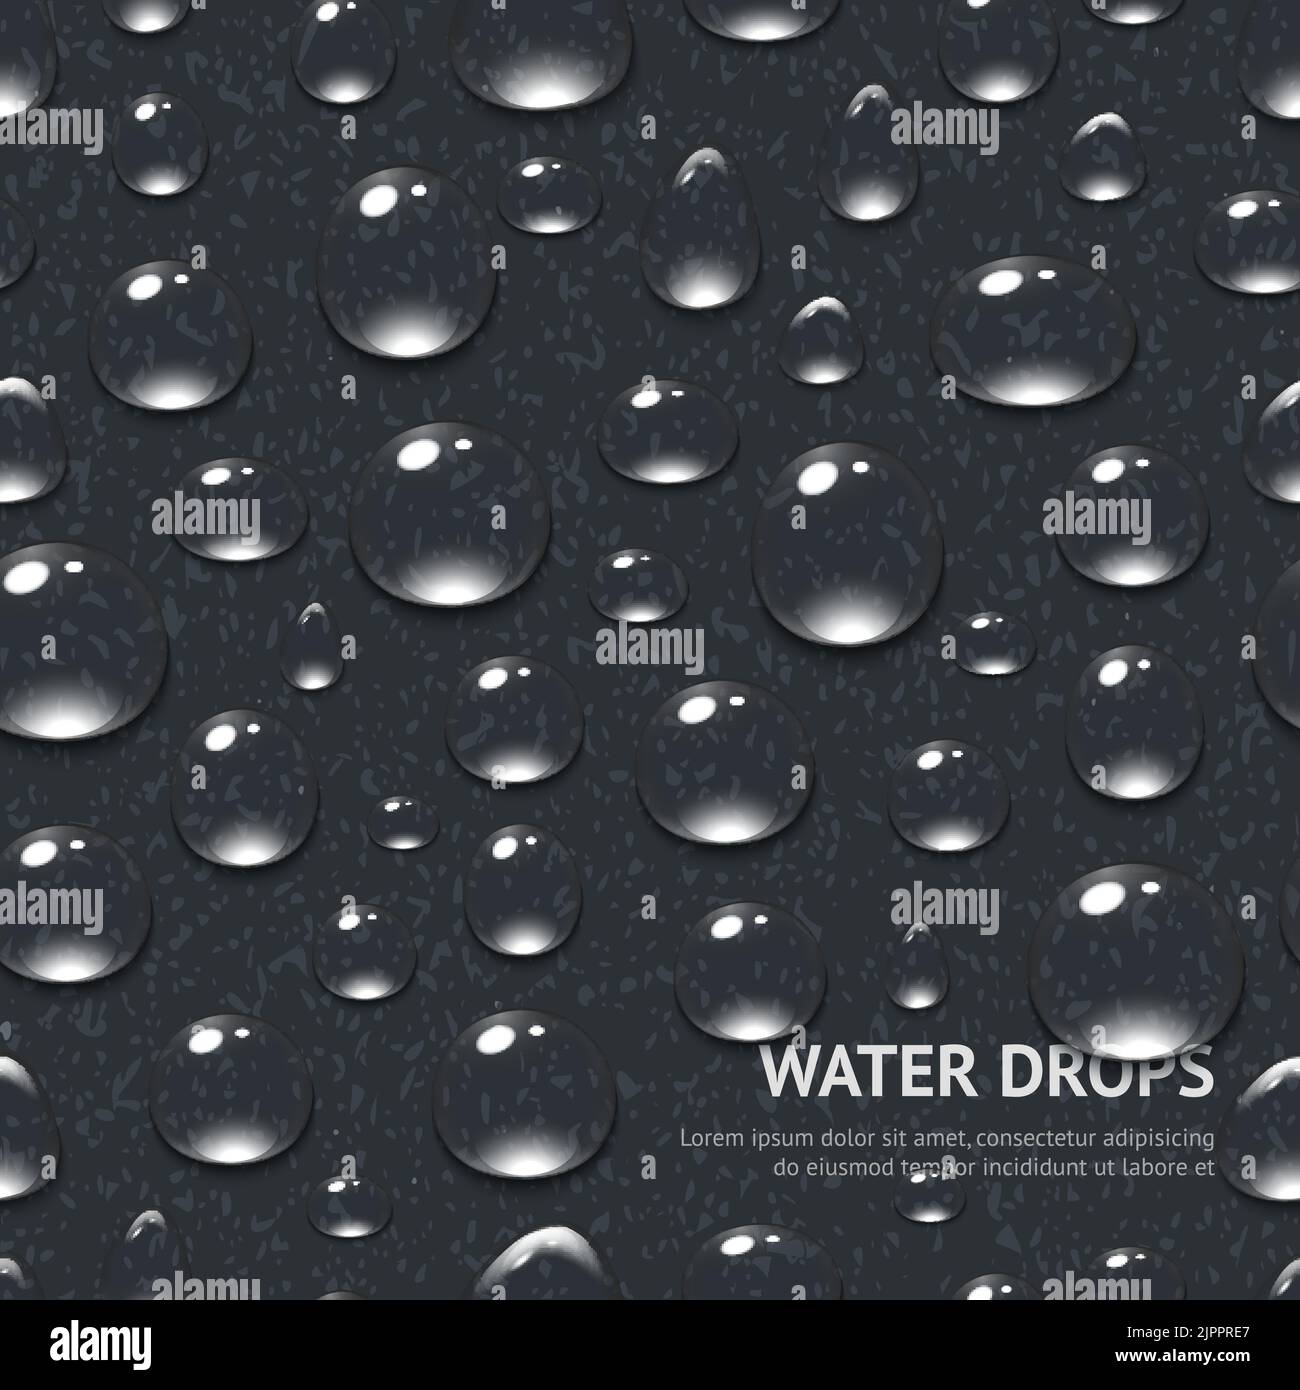 Realistic water drops on black textured background seamless pattern vector illustration Stock Vector